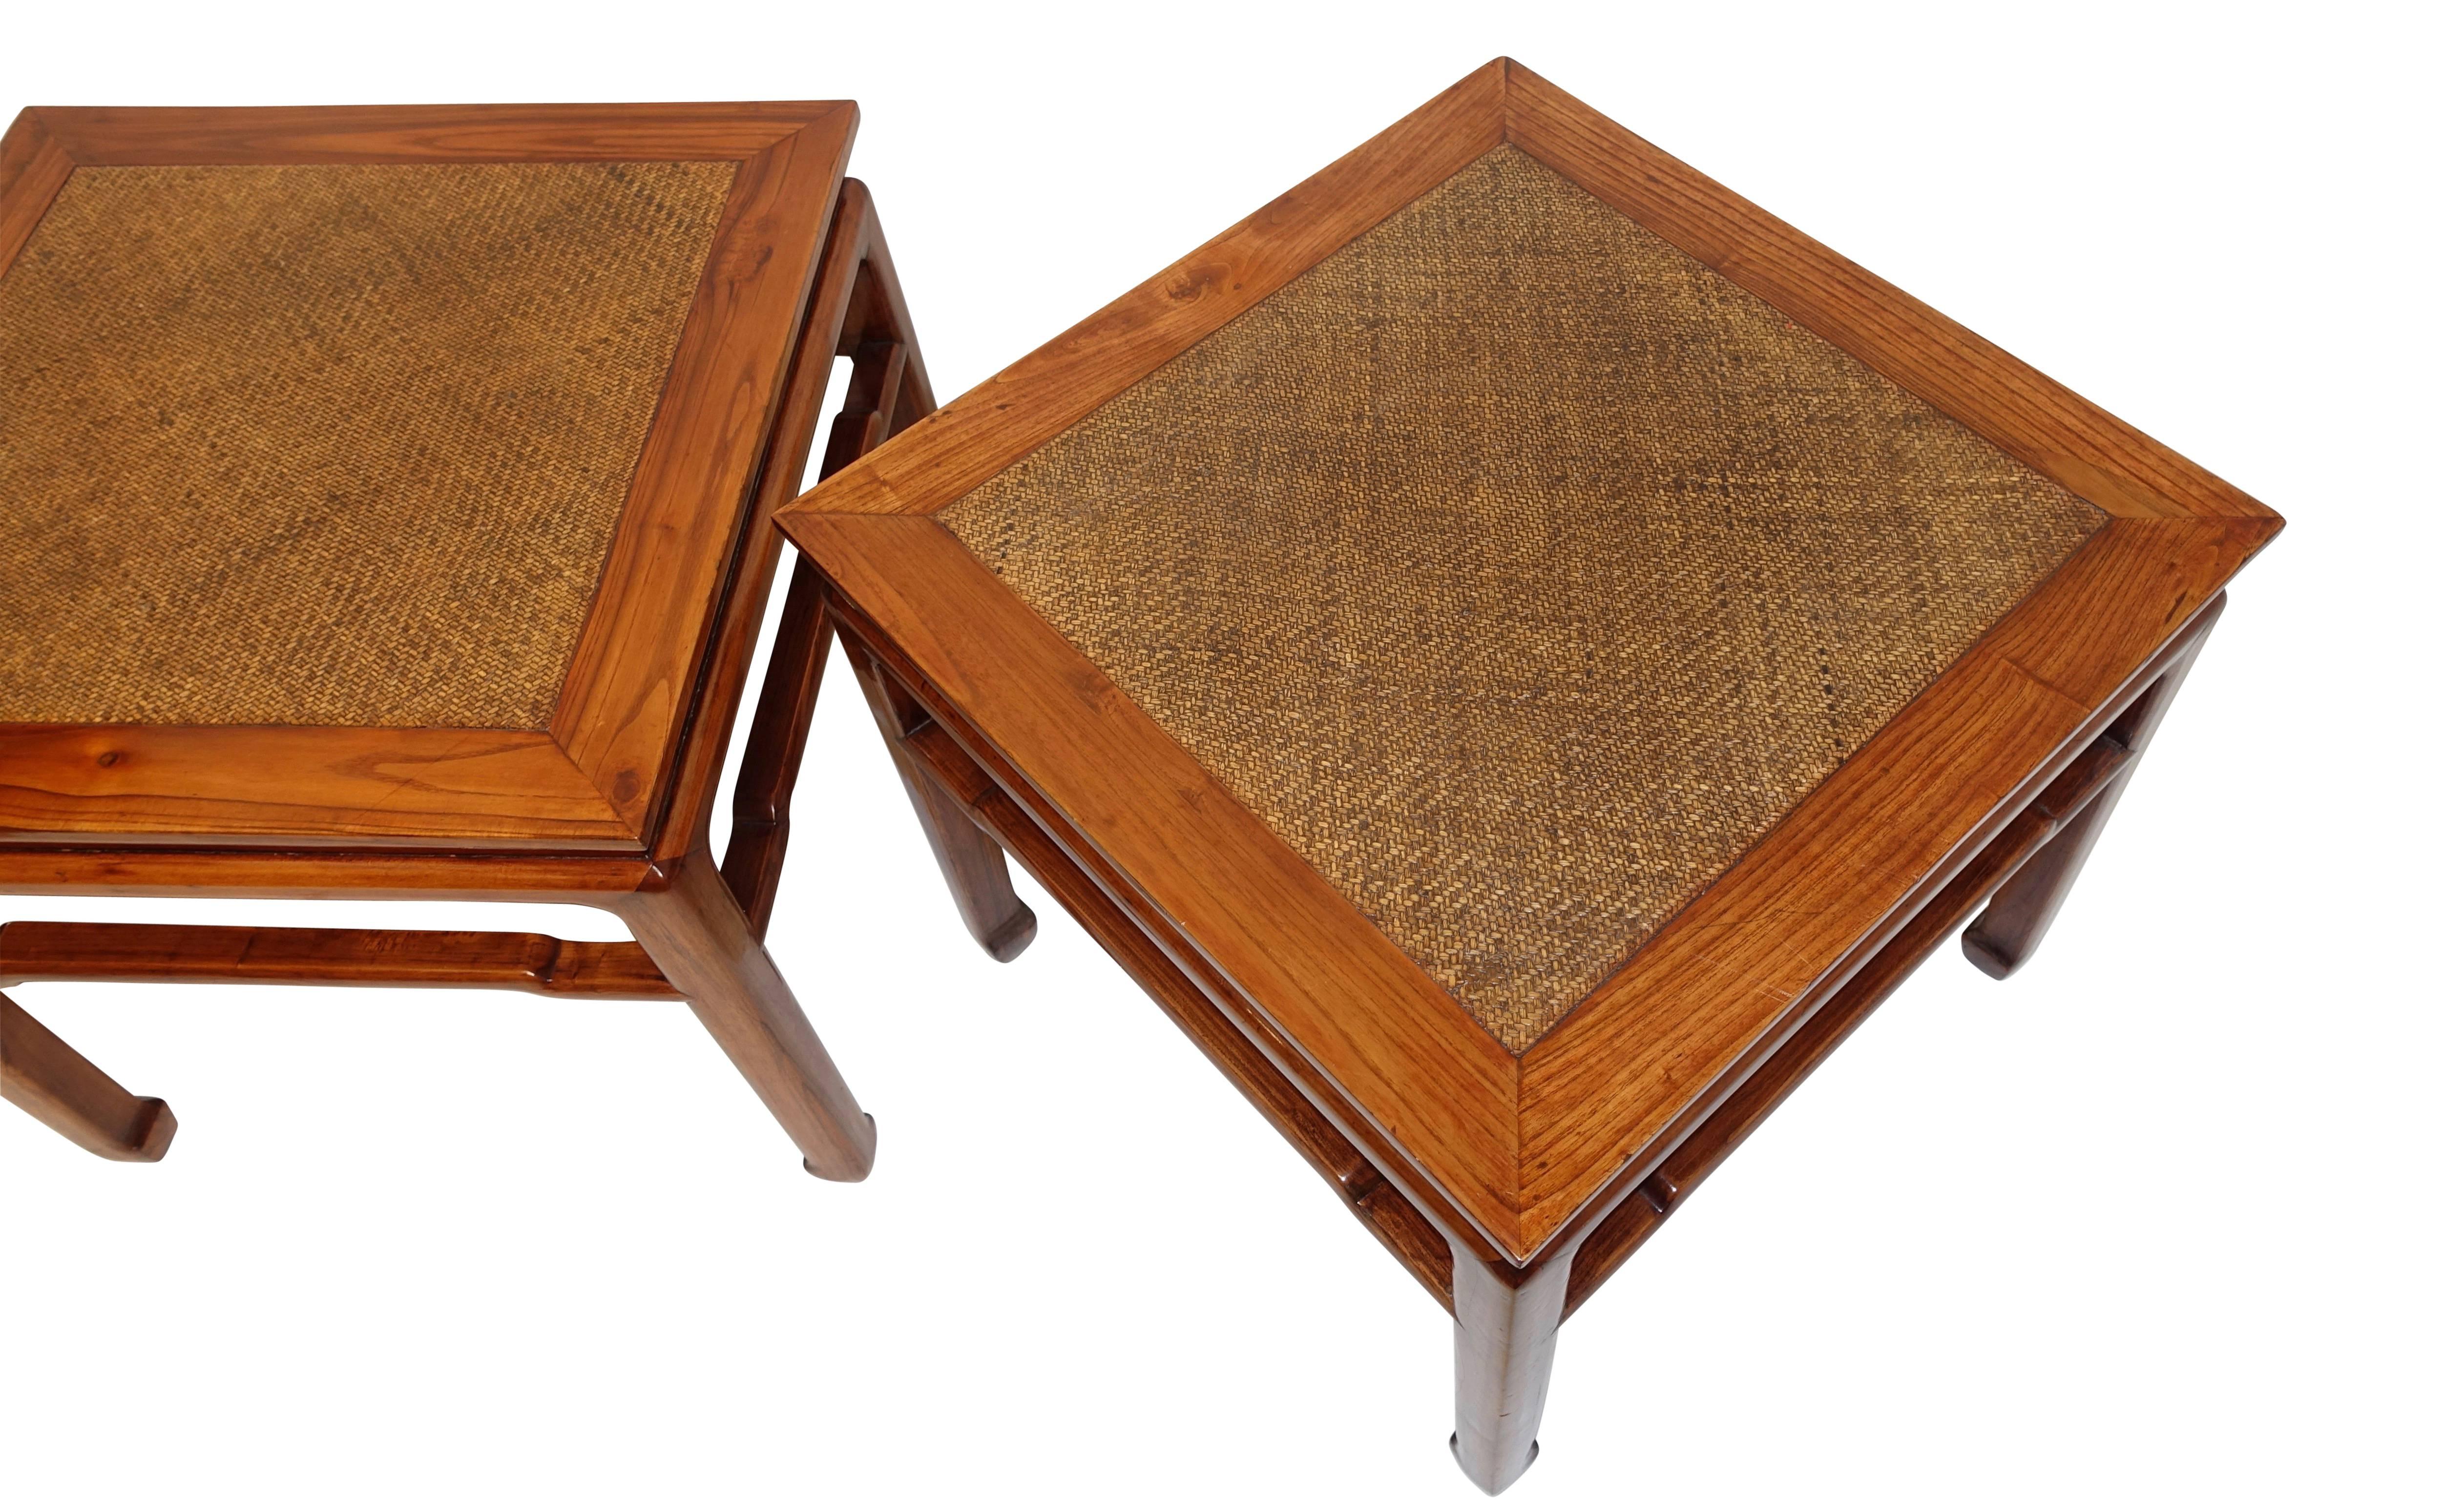 Pair of Chinese Side or End Tables with Woven Panels, Mid-19th Century 1